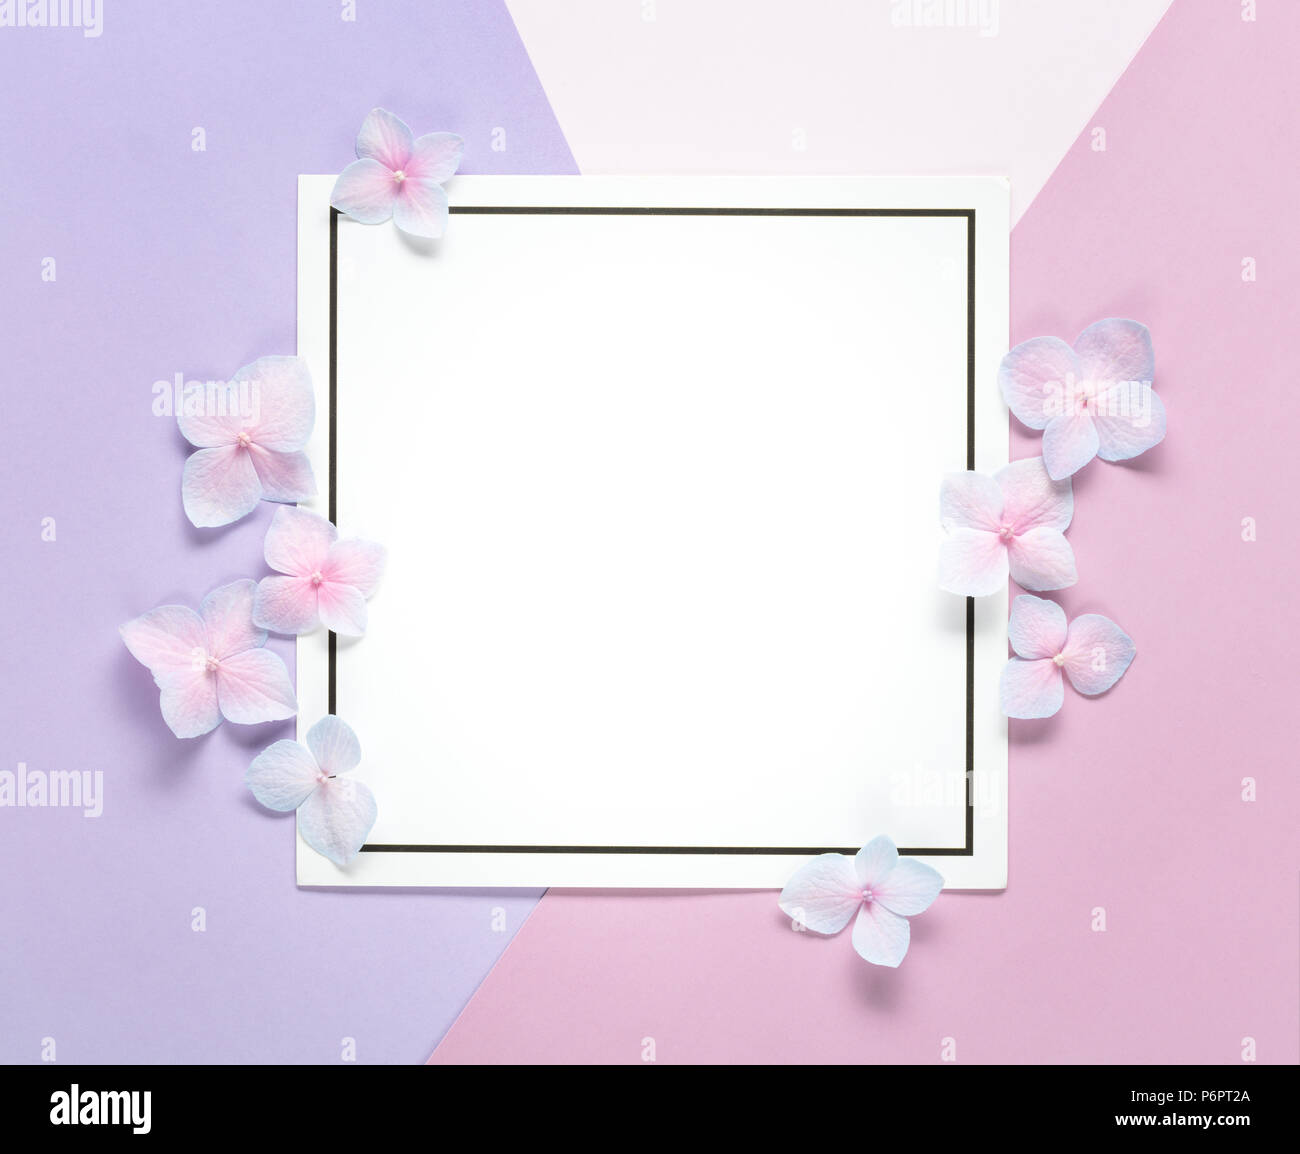 Blank card with flower petals on muticolored pastel background. Stock Photo